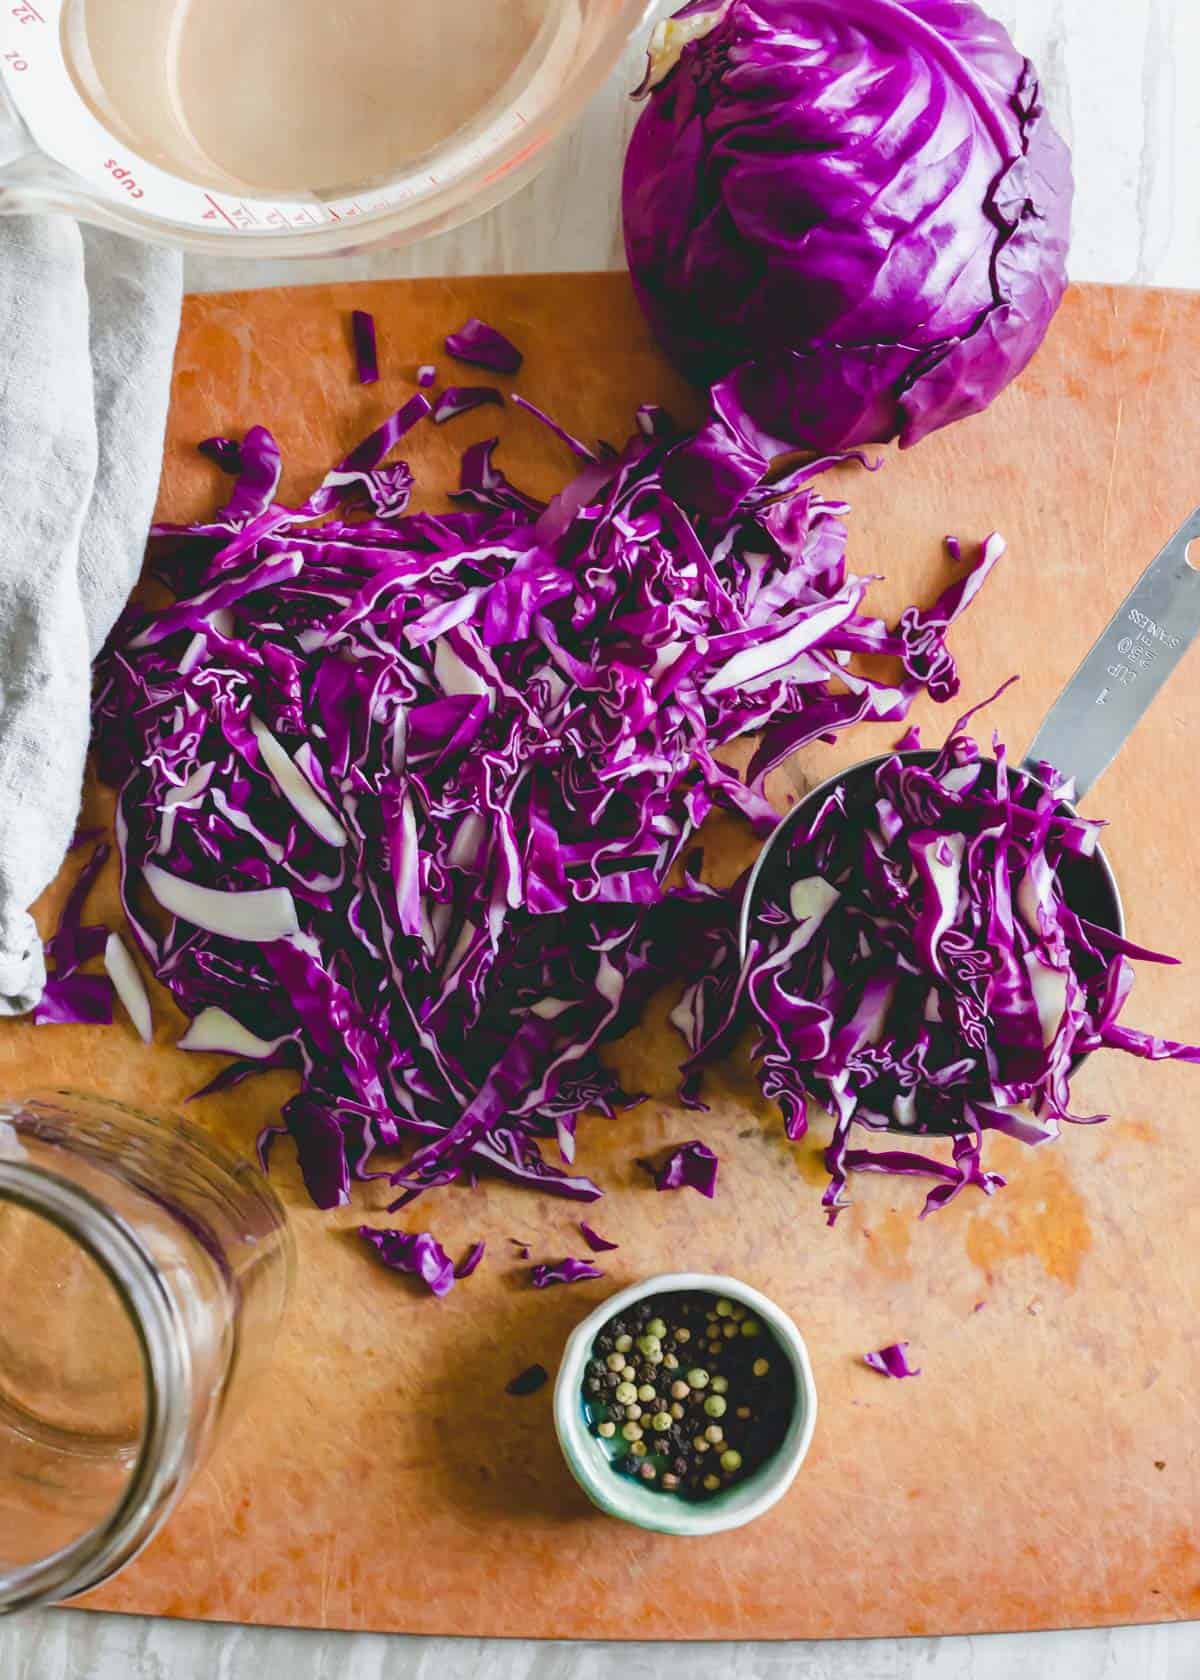 Thinly sliced red cabbage on a cutting board.